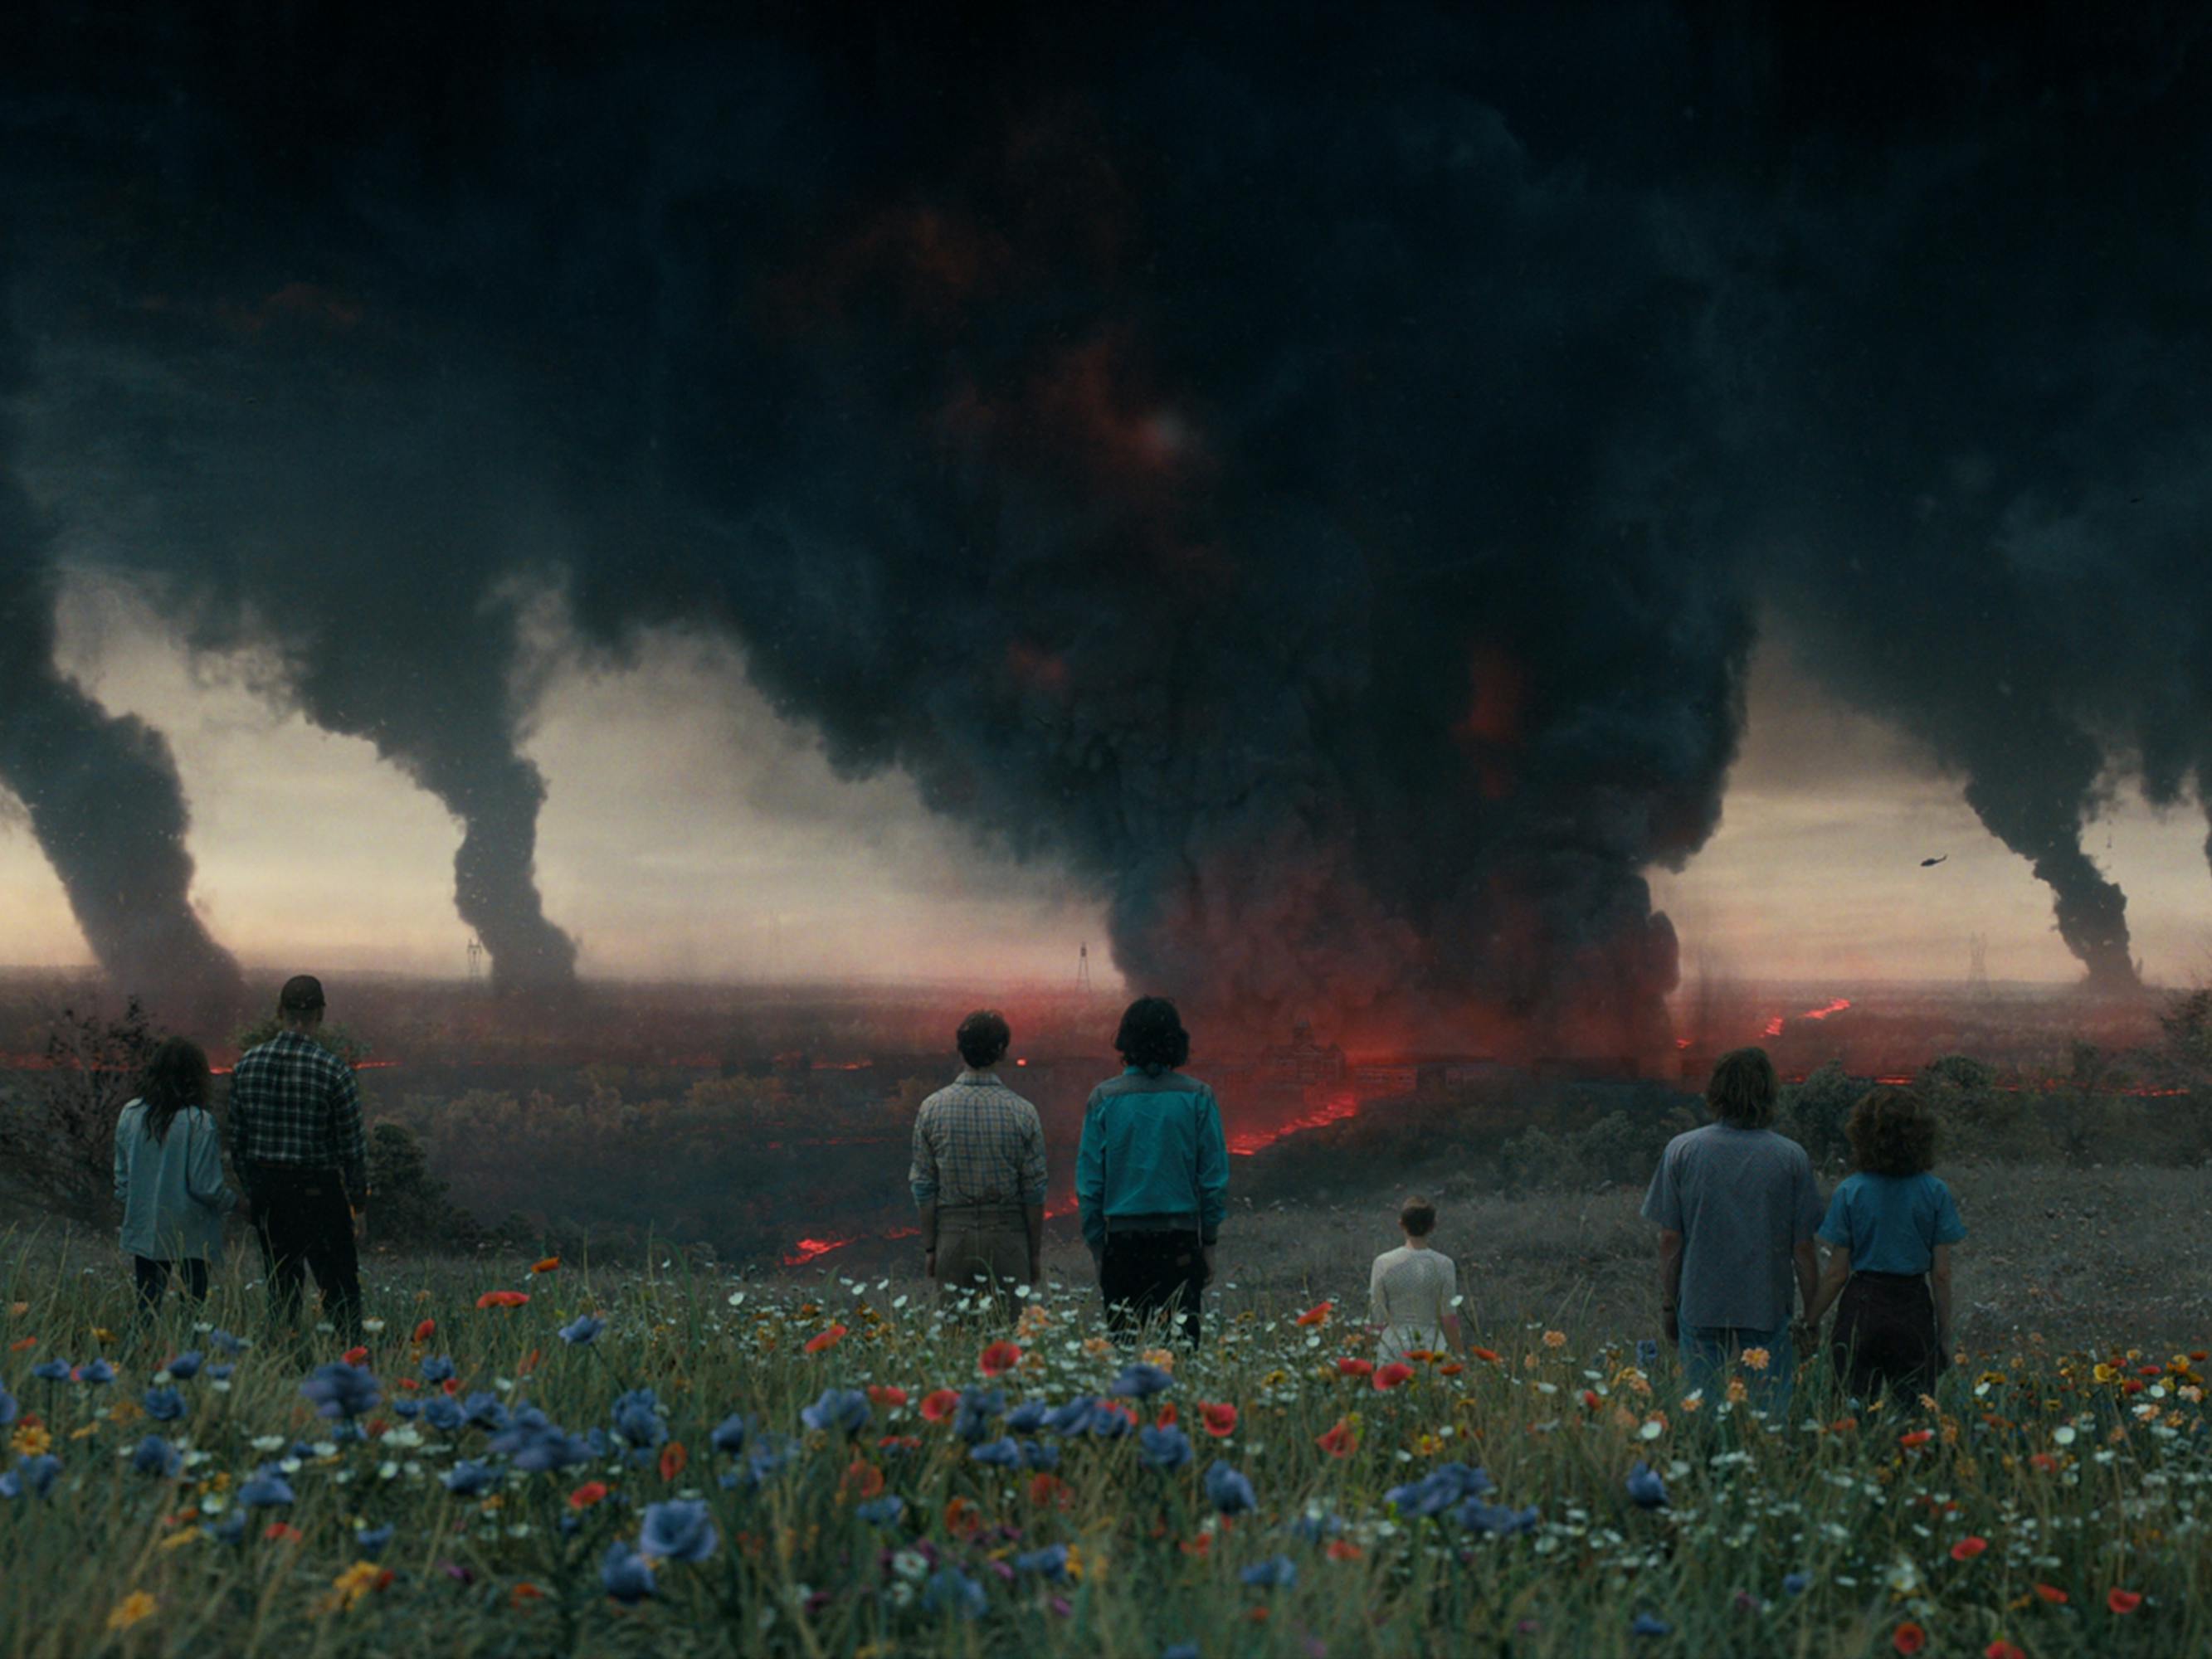 The characters of Stranger Things 4 look on at some explosions in a the middle of a flower-filled field. I hope their mullets don't get singed!